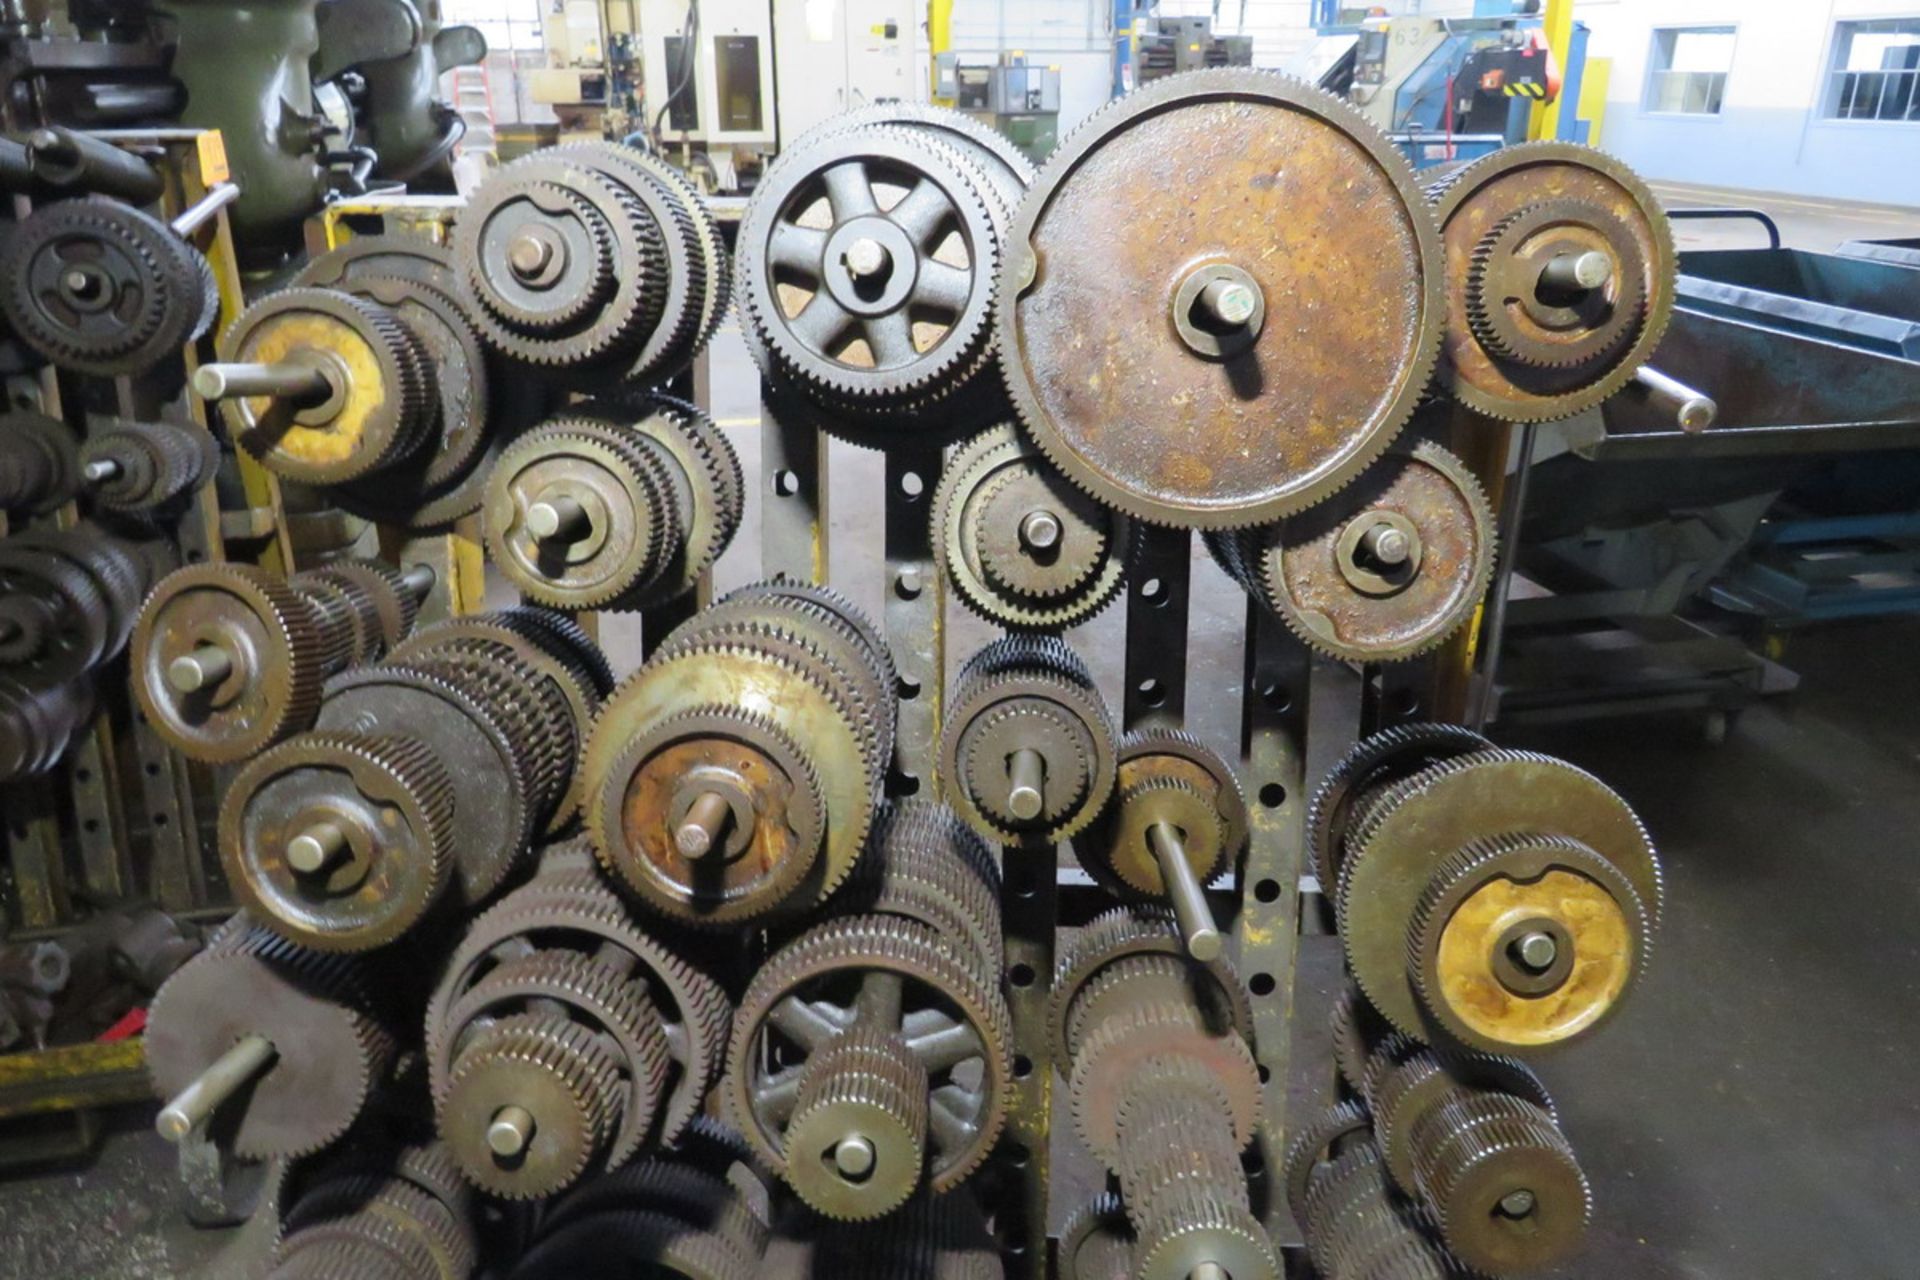 Large Assortment of Fellows Shaper Change Gears on Rolling Cantilever Rack - Image 2 of 3